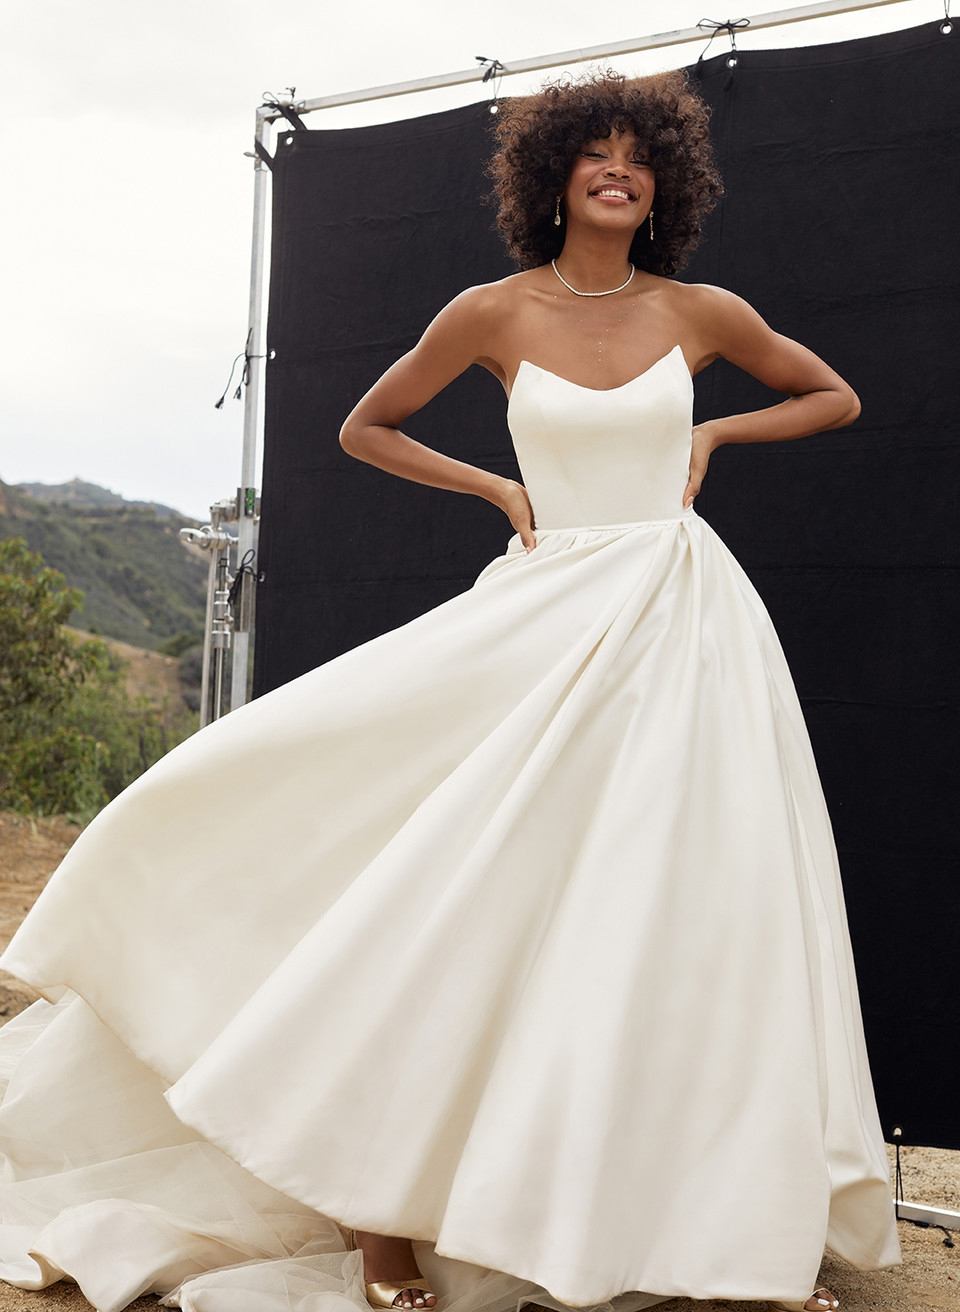 Strapless Ball-Gown Wedding Dresses With Satin - Missacc